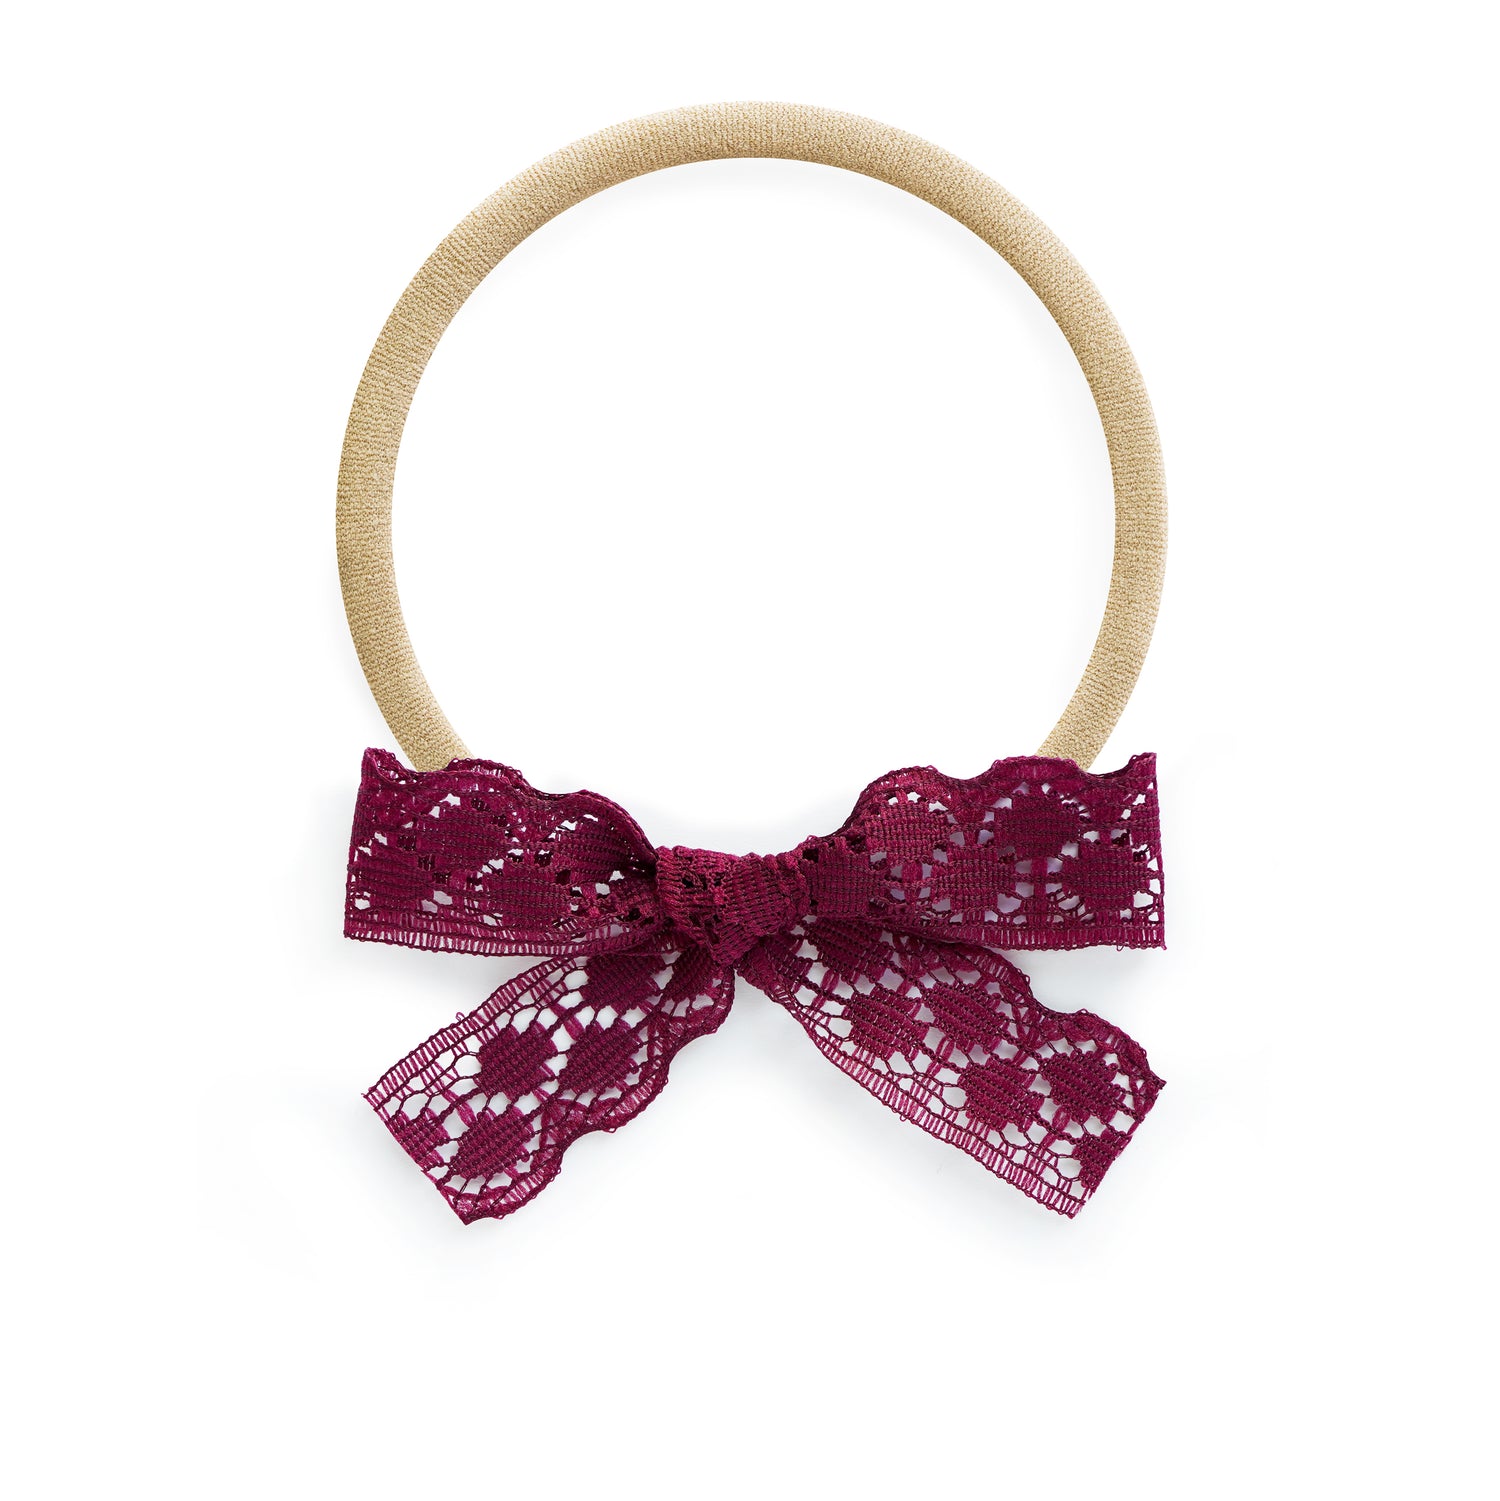 village baby lace penelope bow deep pink maroon burgundy pretty accessory baby headband stretchy